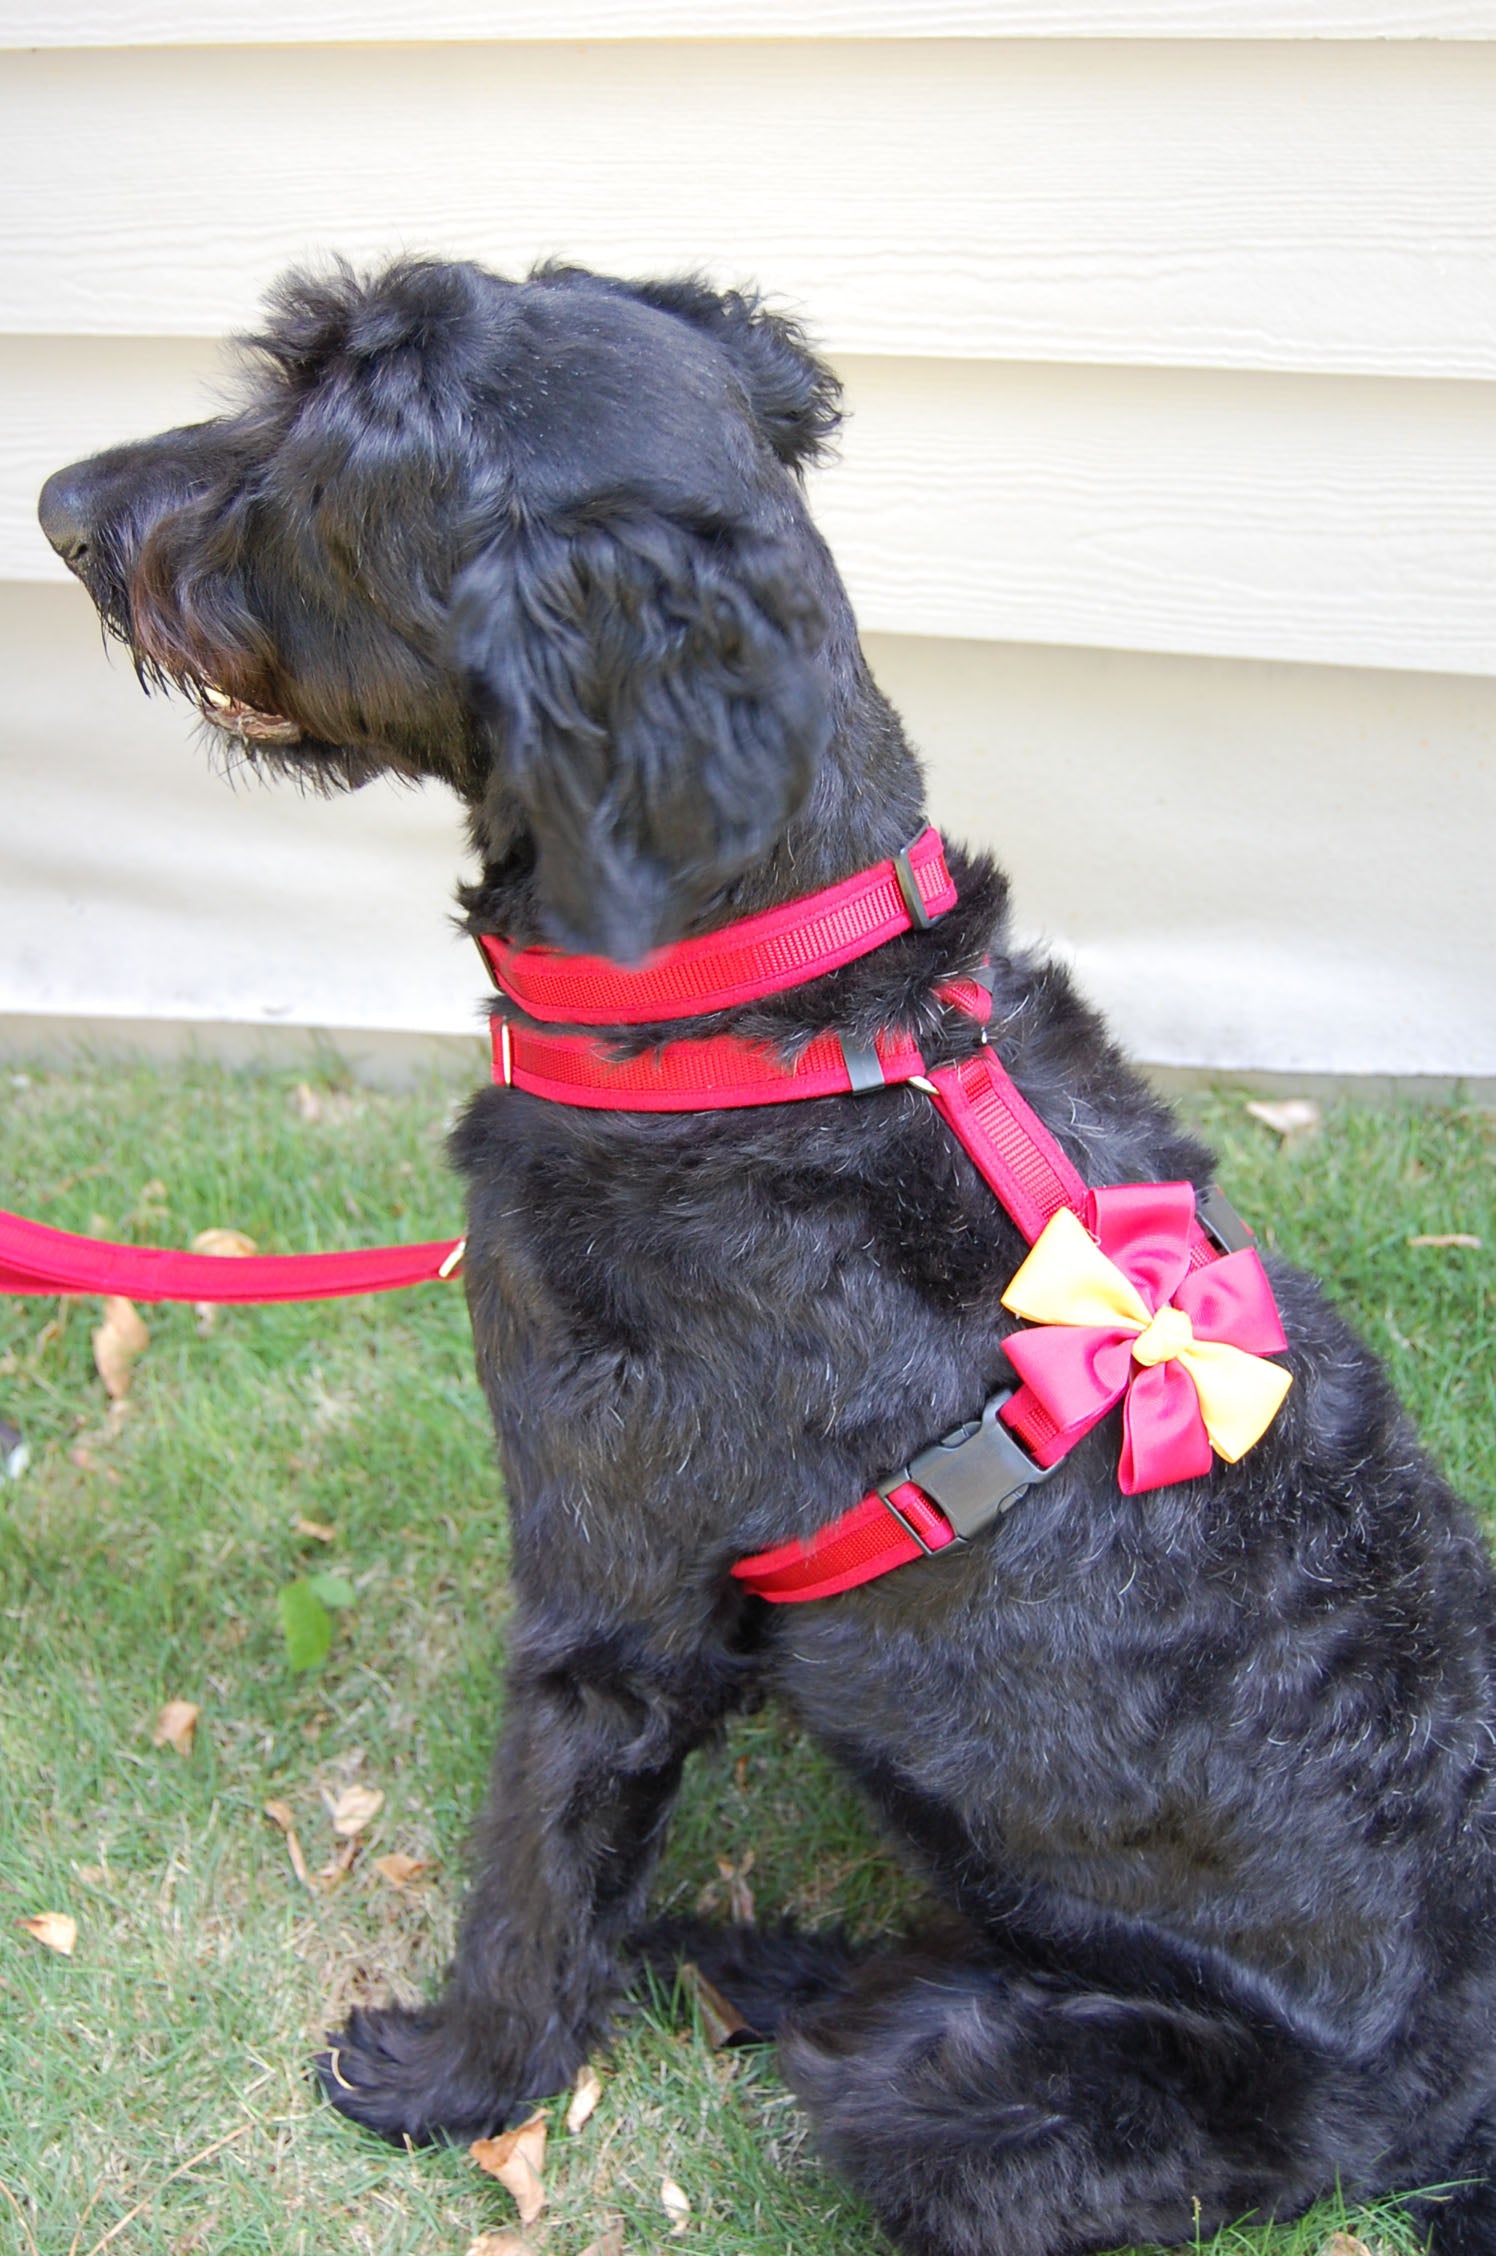 Dog Harness - Red